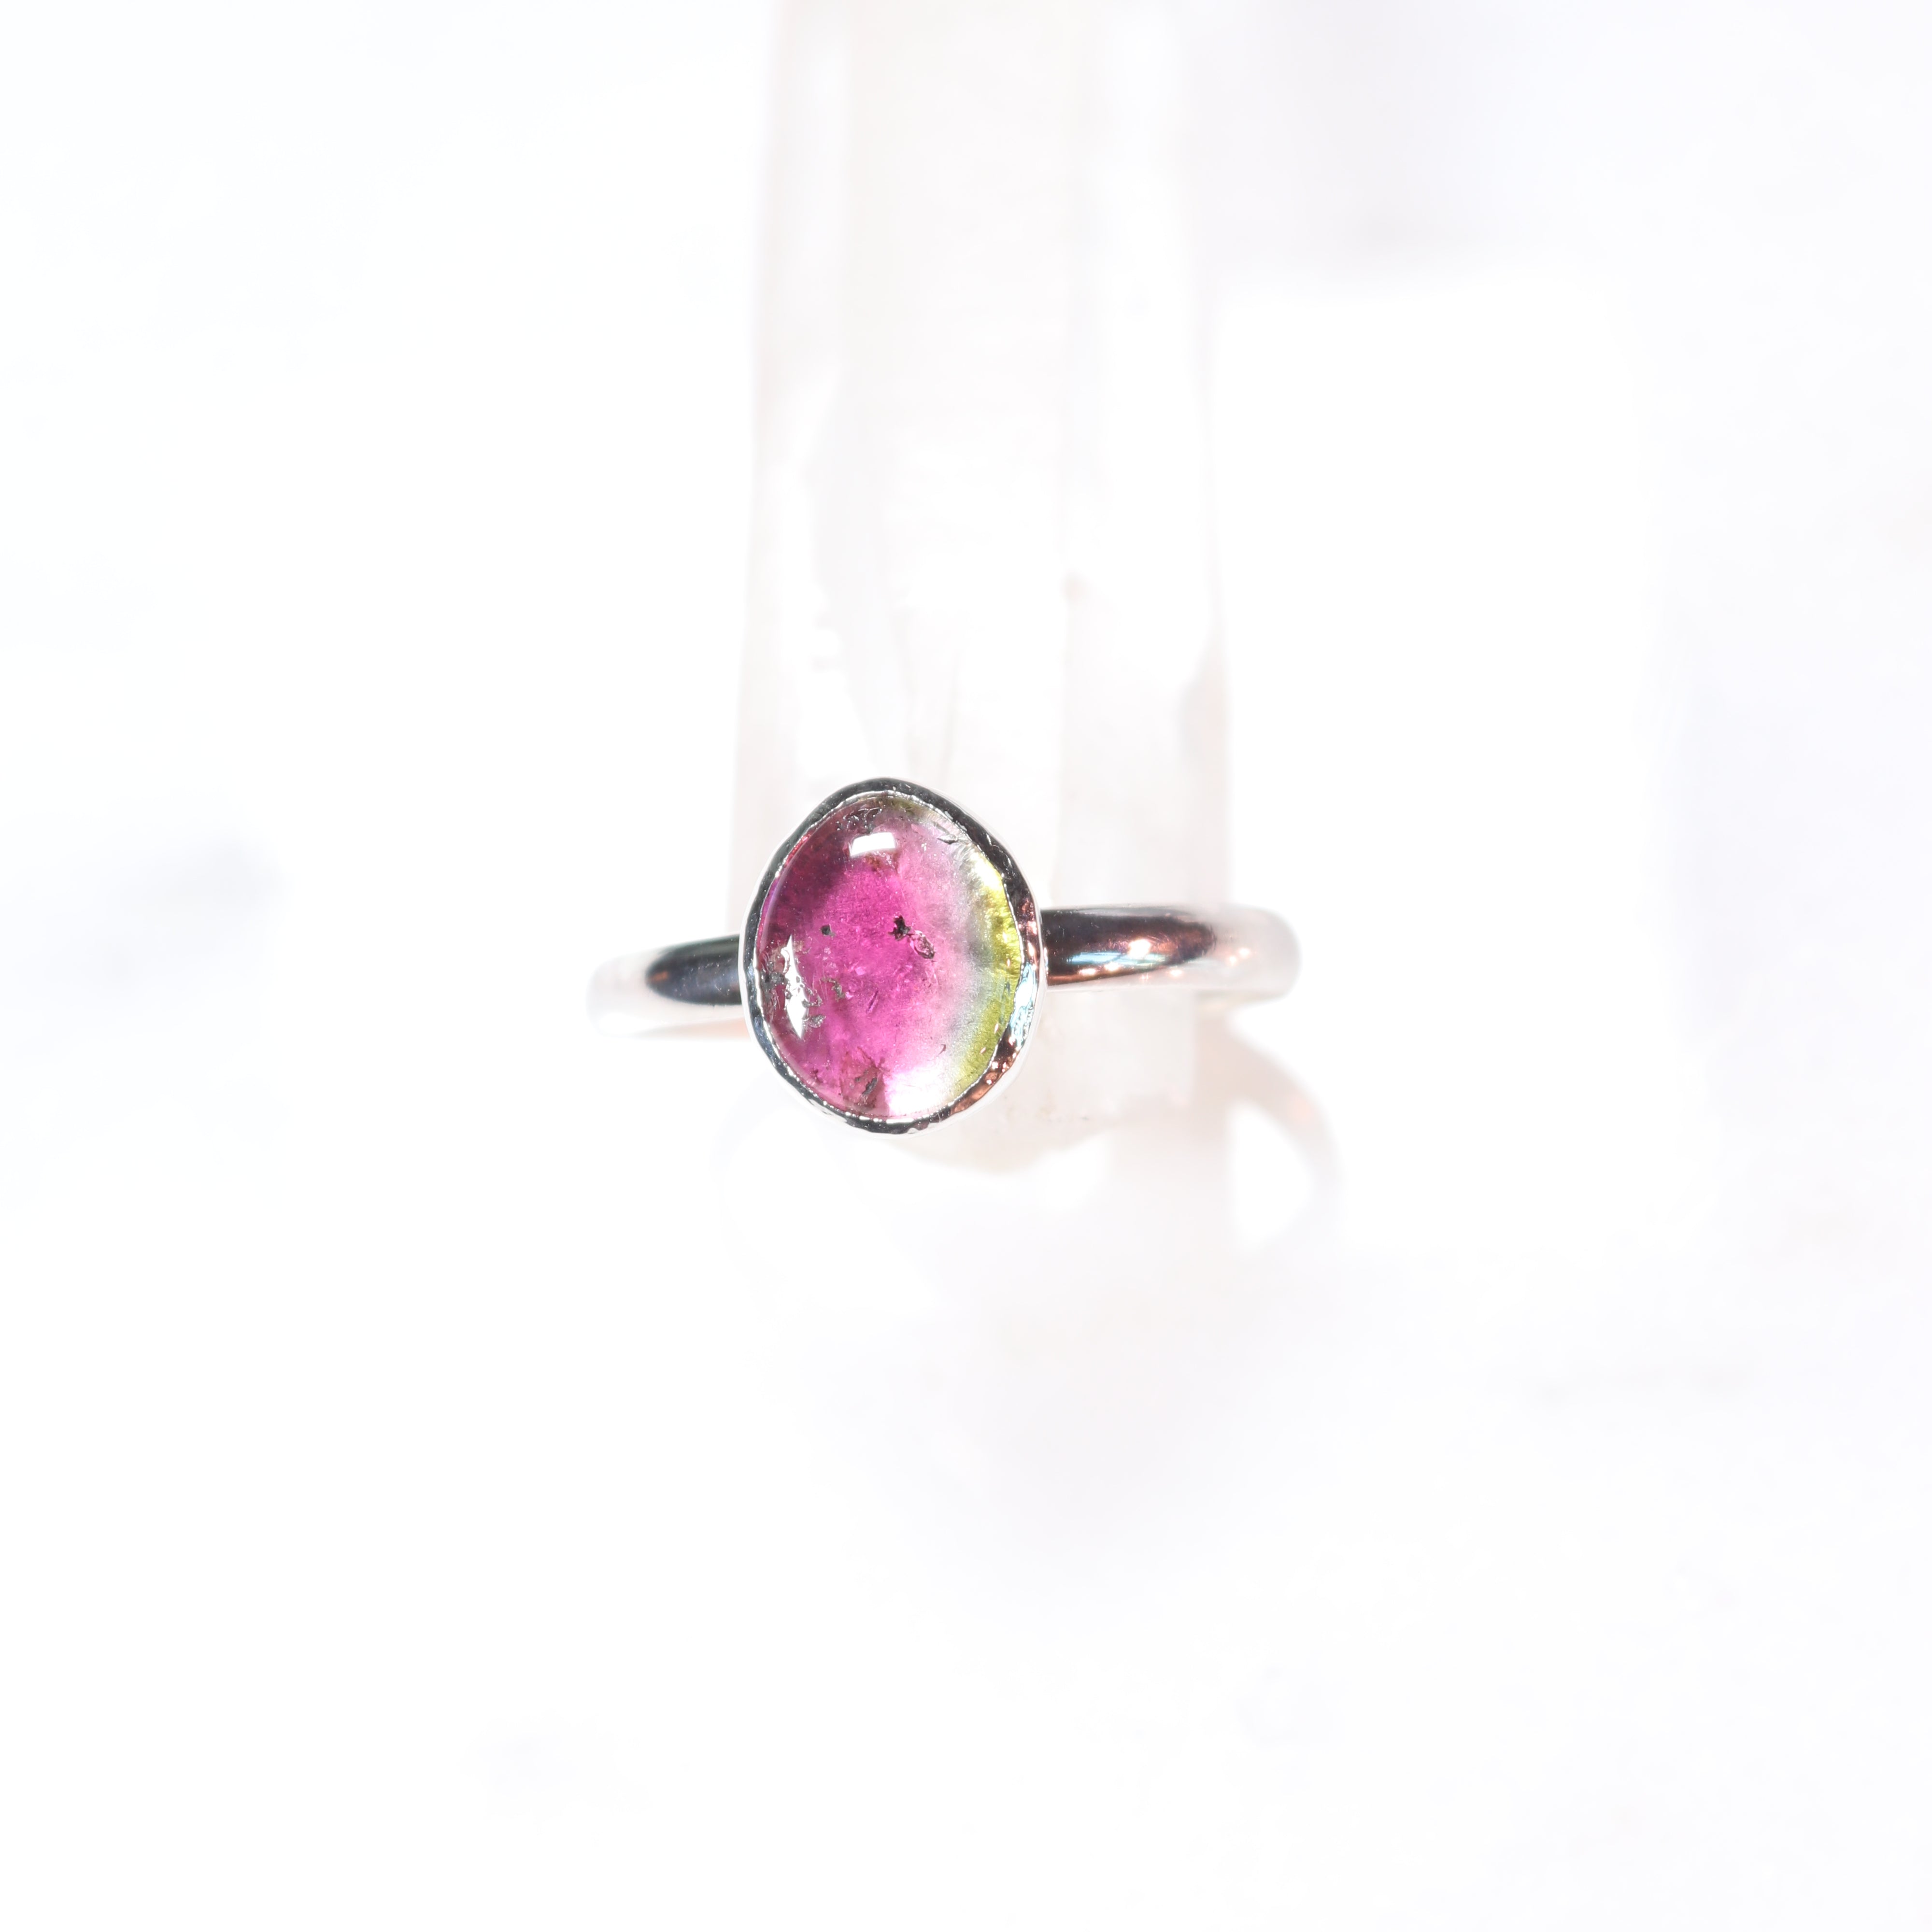 Watermelon Tourmaline Stone Ring in Sterling Silver